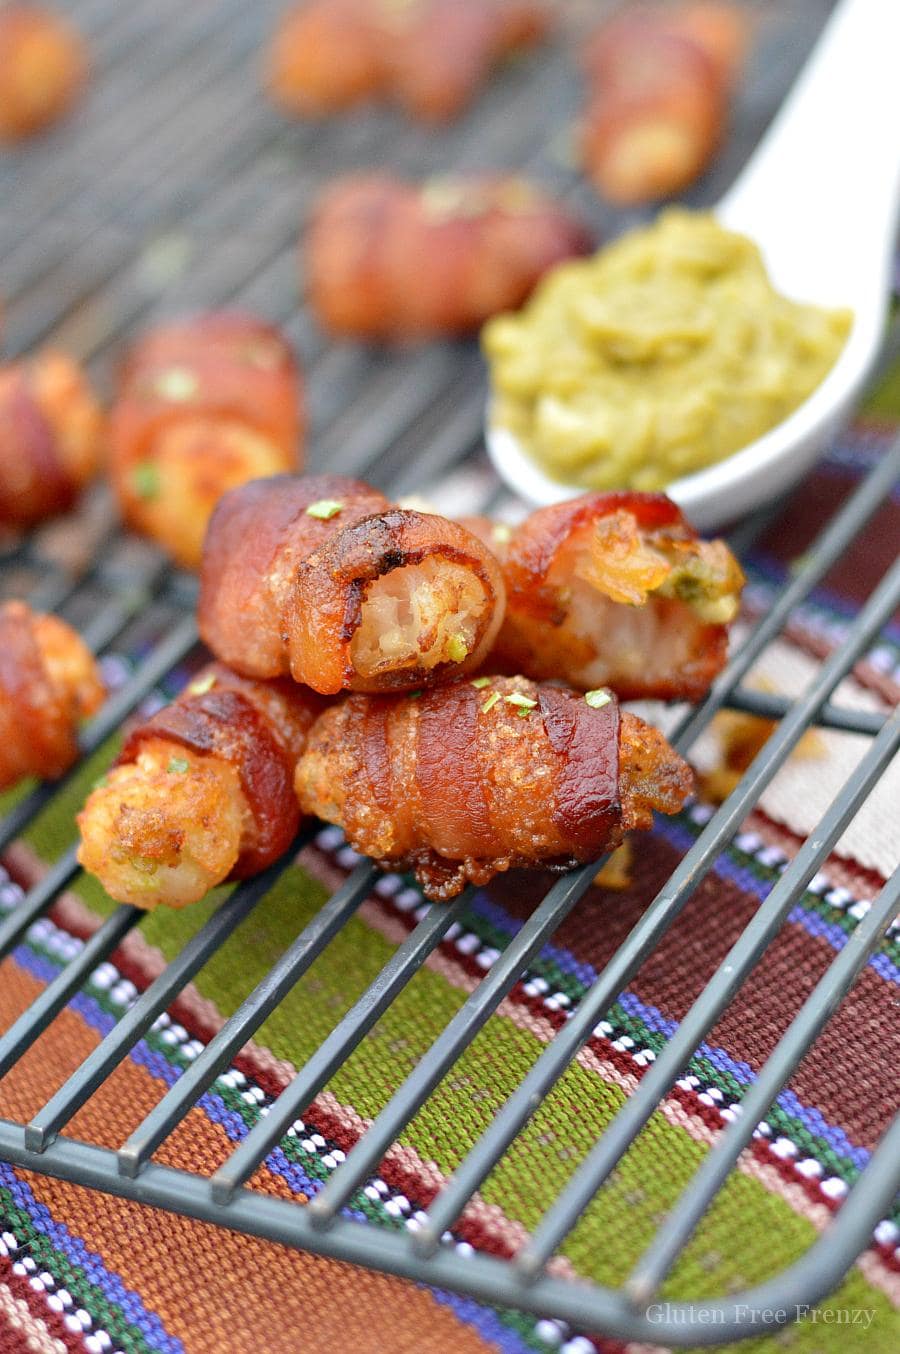 Bacon wrapped tater tots
